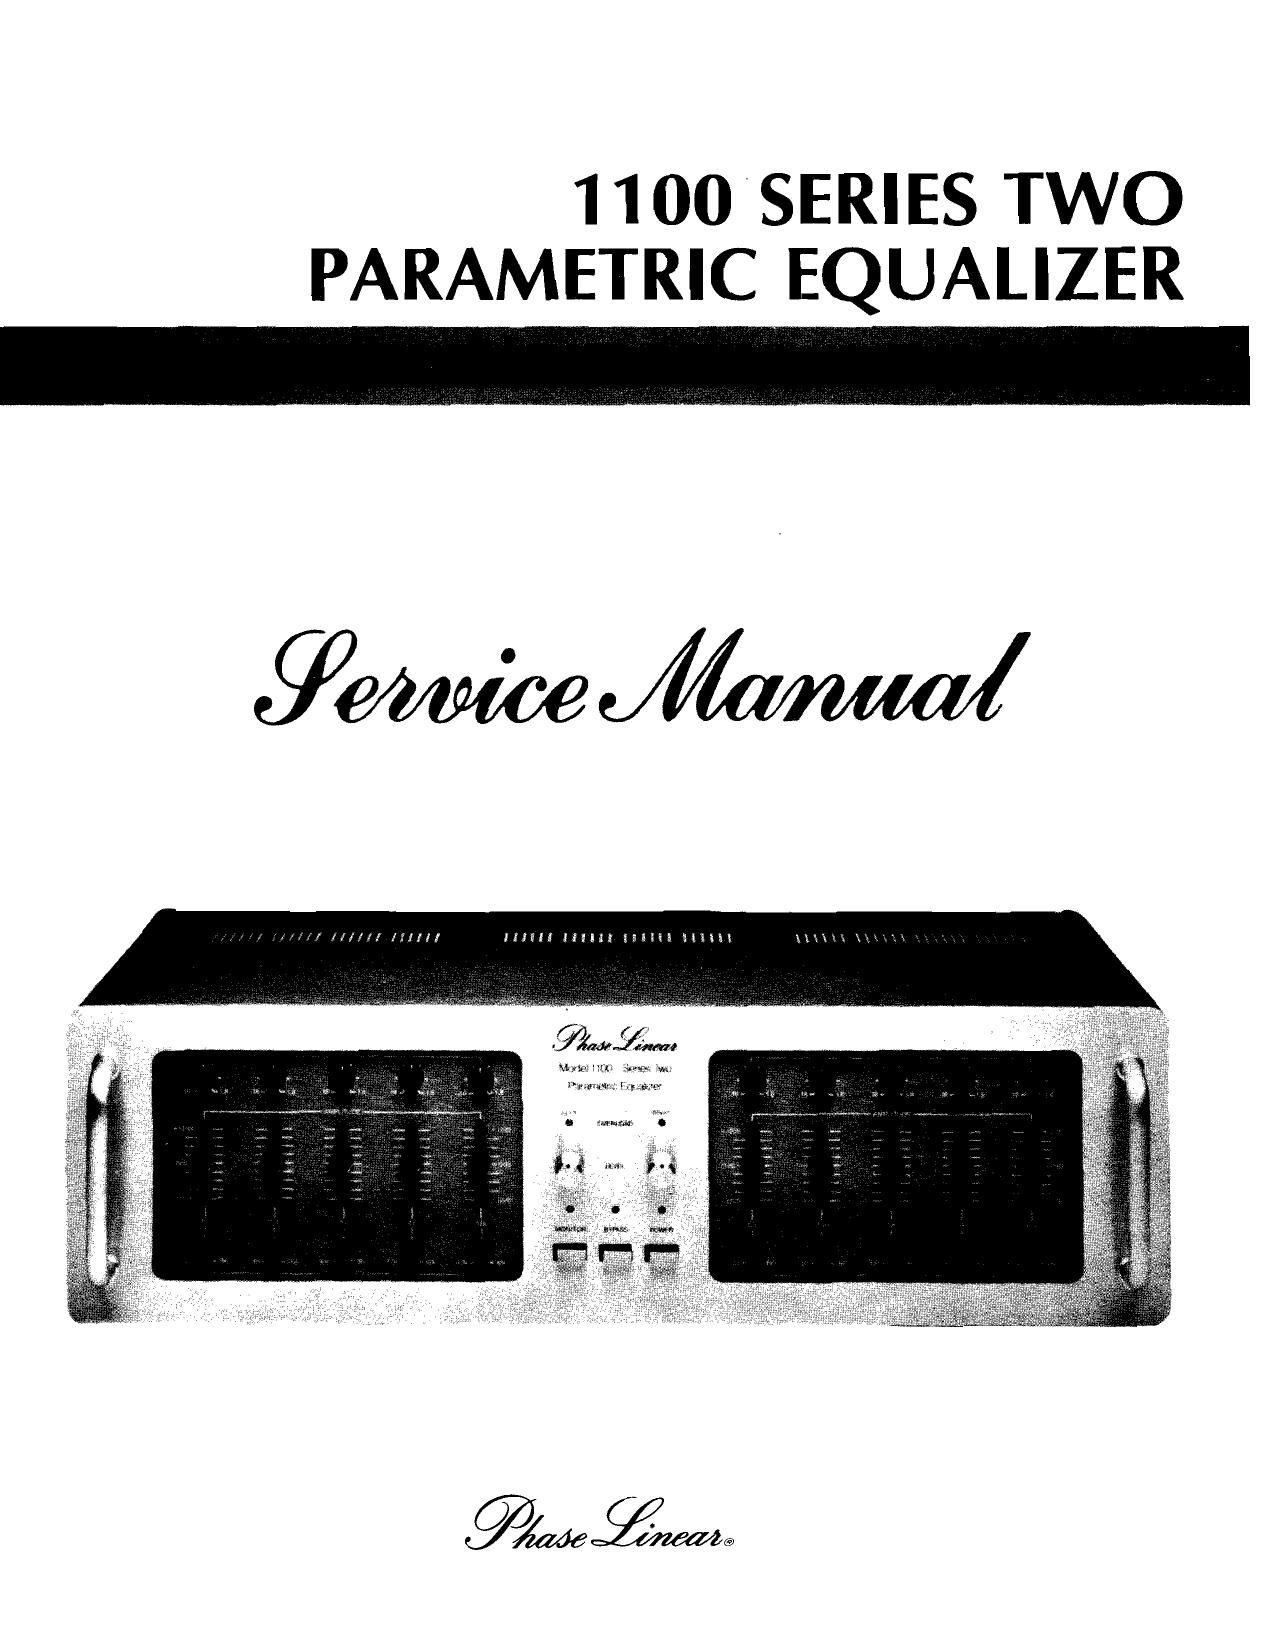 Phase Linear 1100 Series Two Service Manual